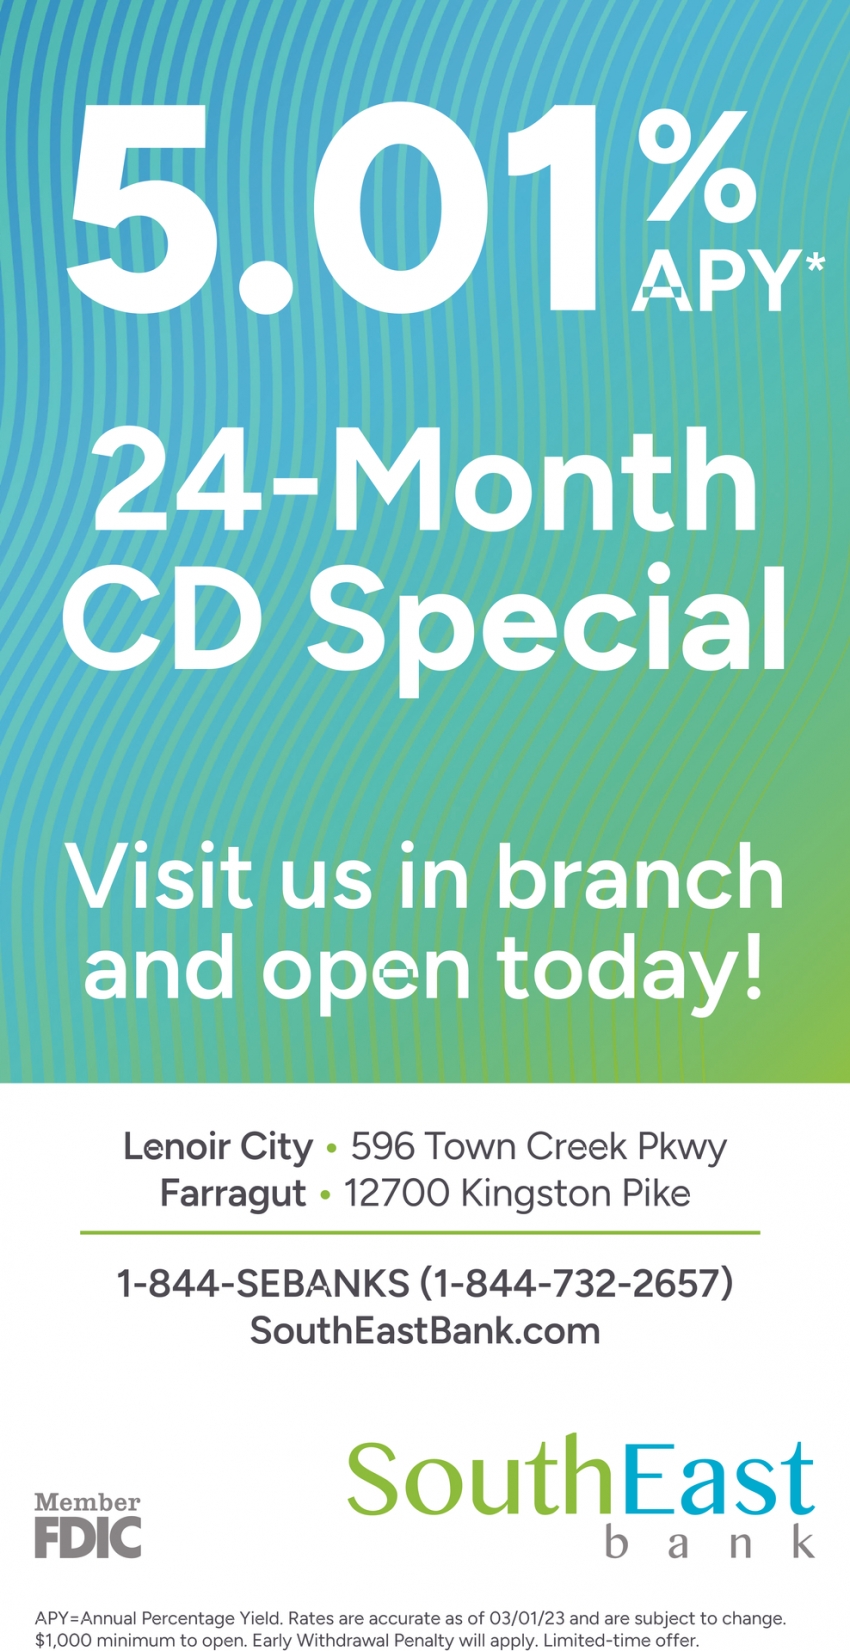 24-Month CD Special